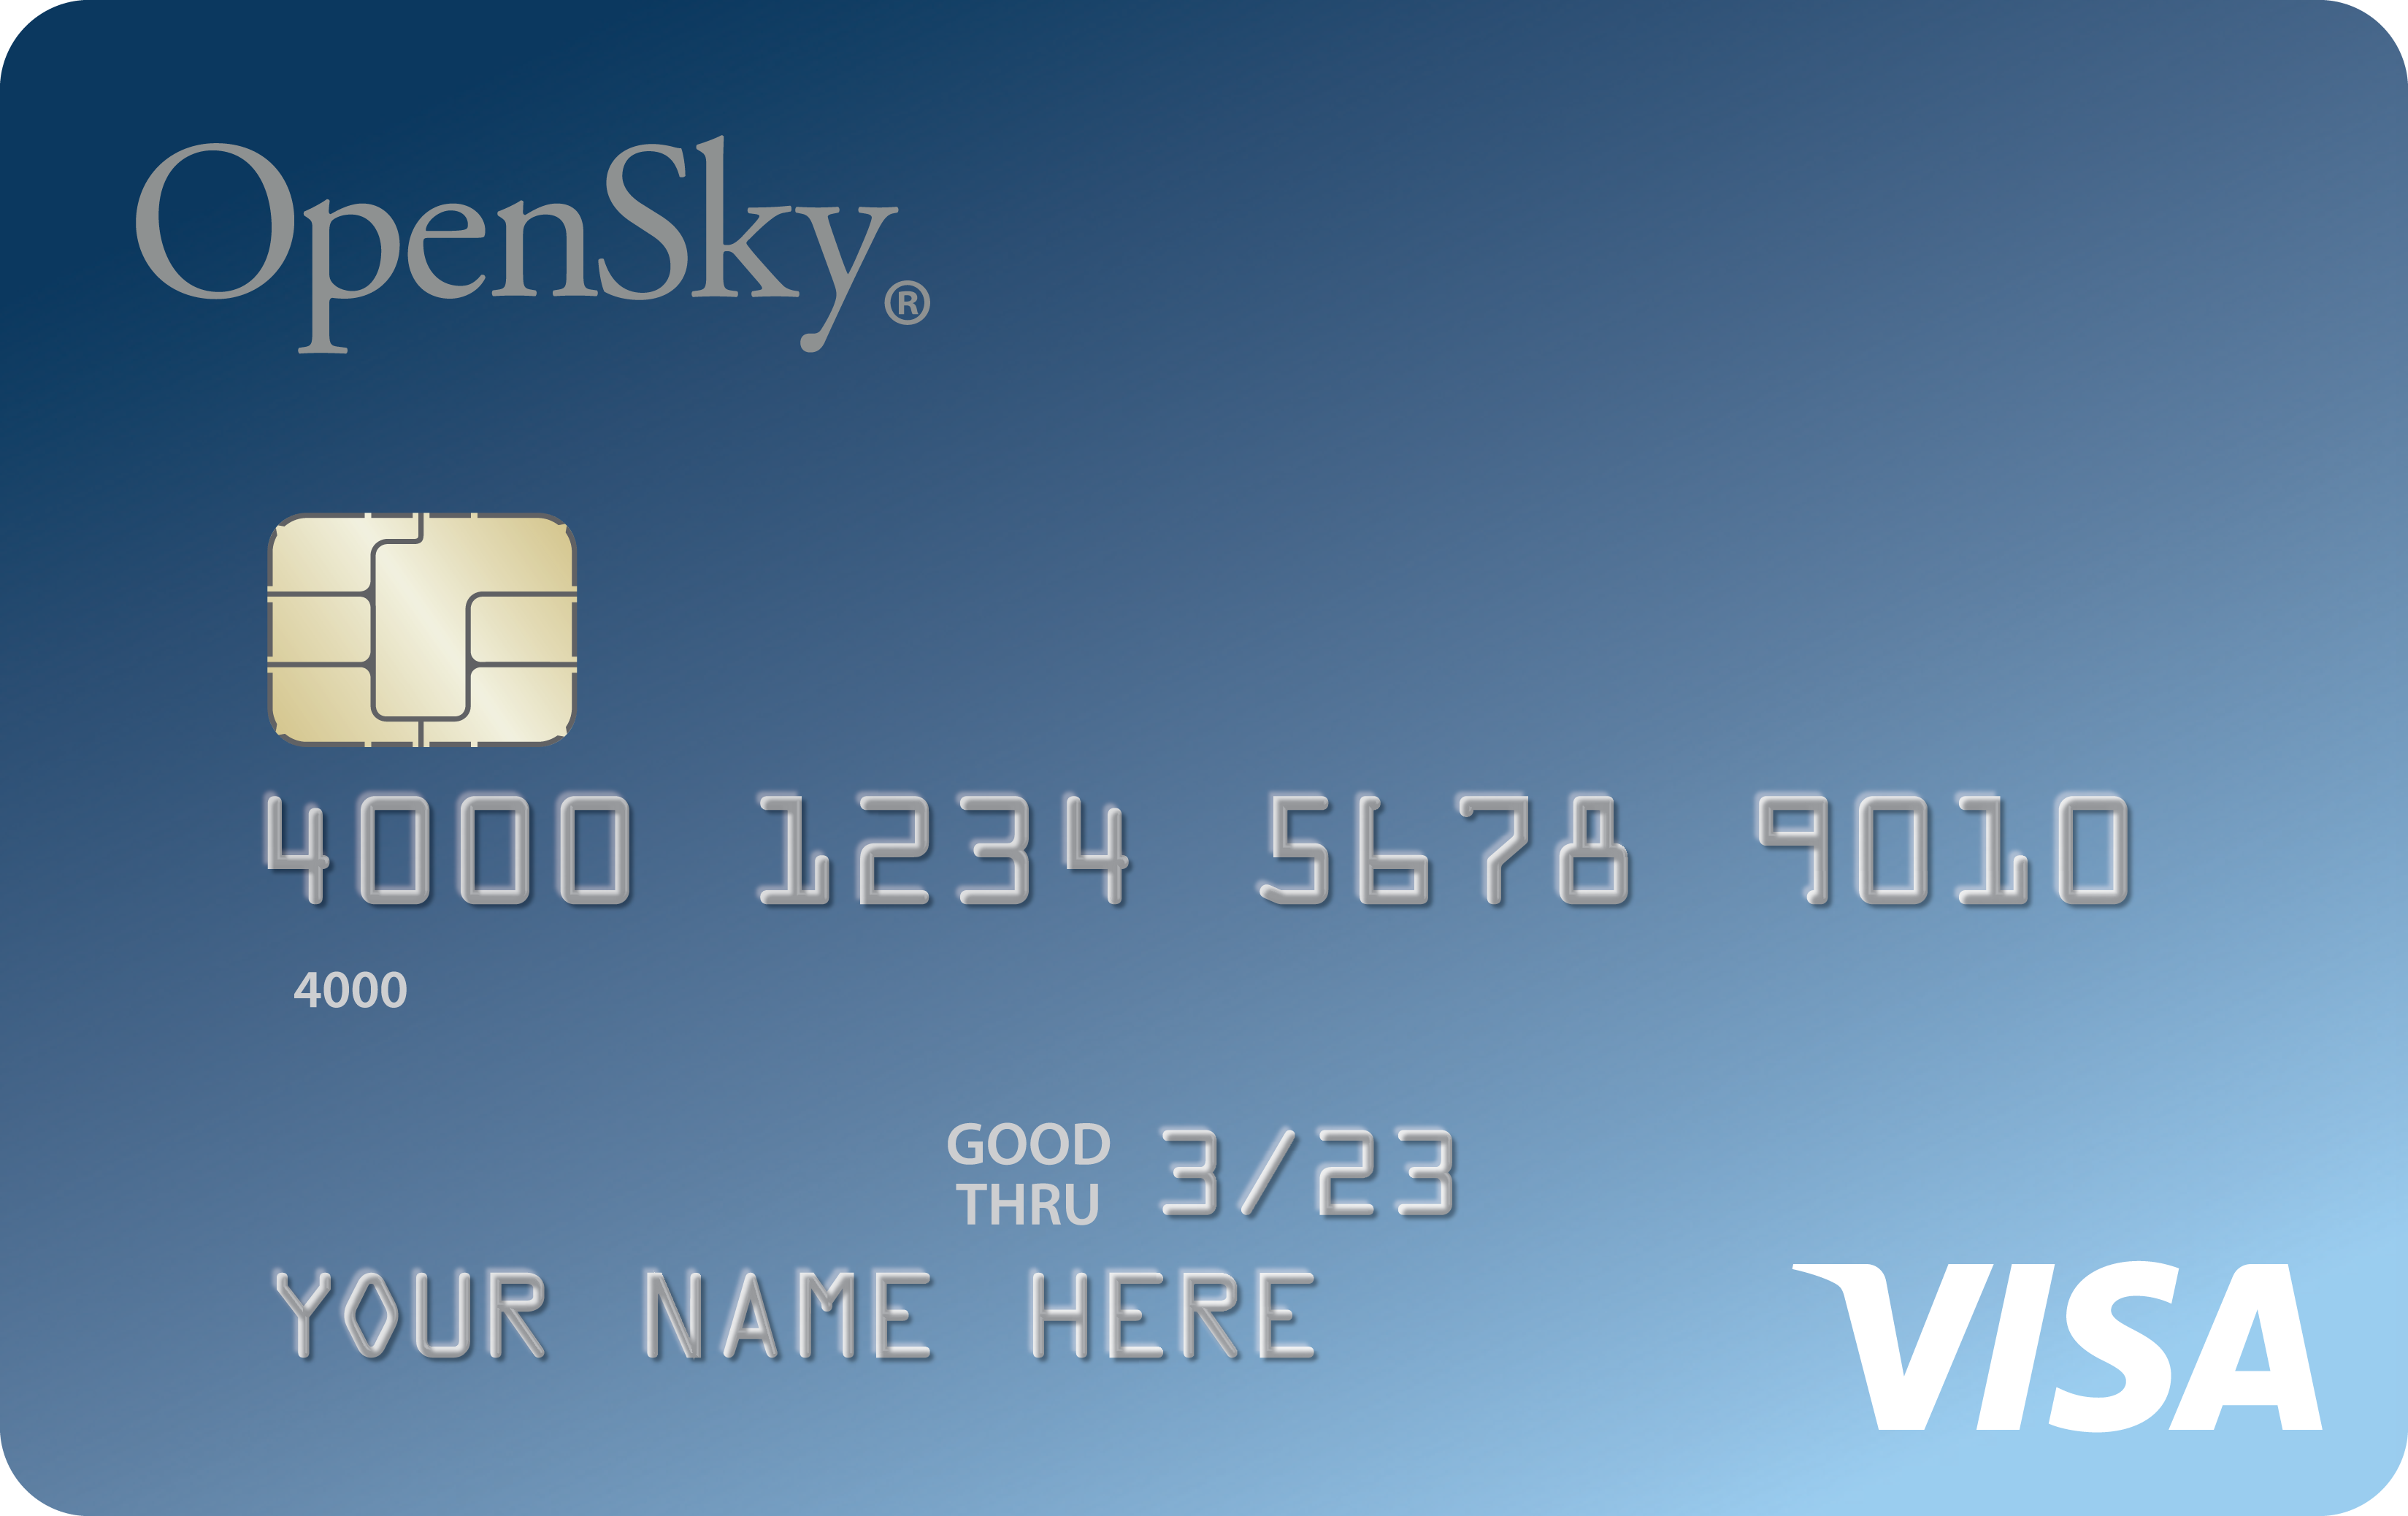 Learn how to apply for the OpenSky® Secured Visa® Credit Card